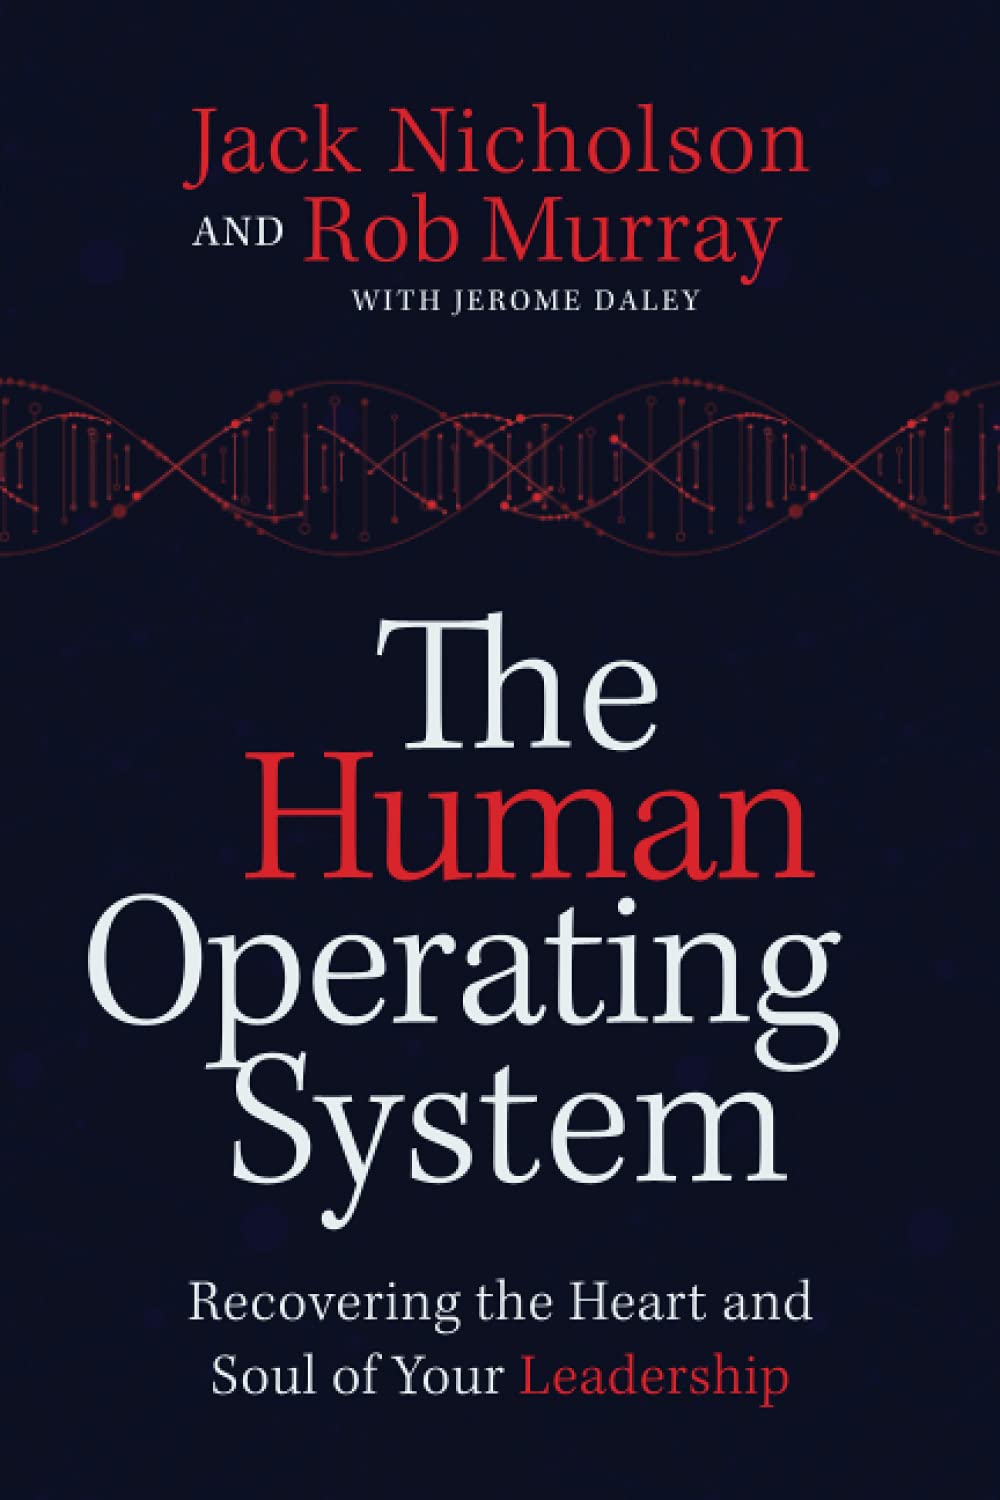 The Human Operating System: Recovering the Heart and Soul of Your Leadership